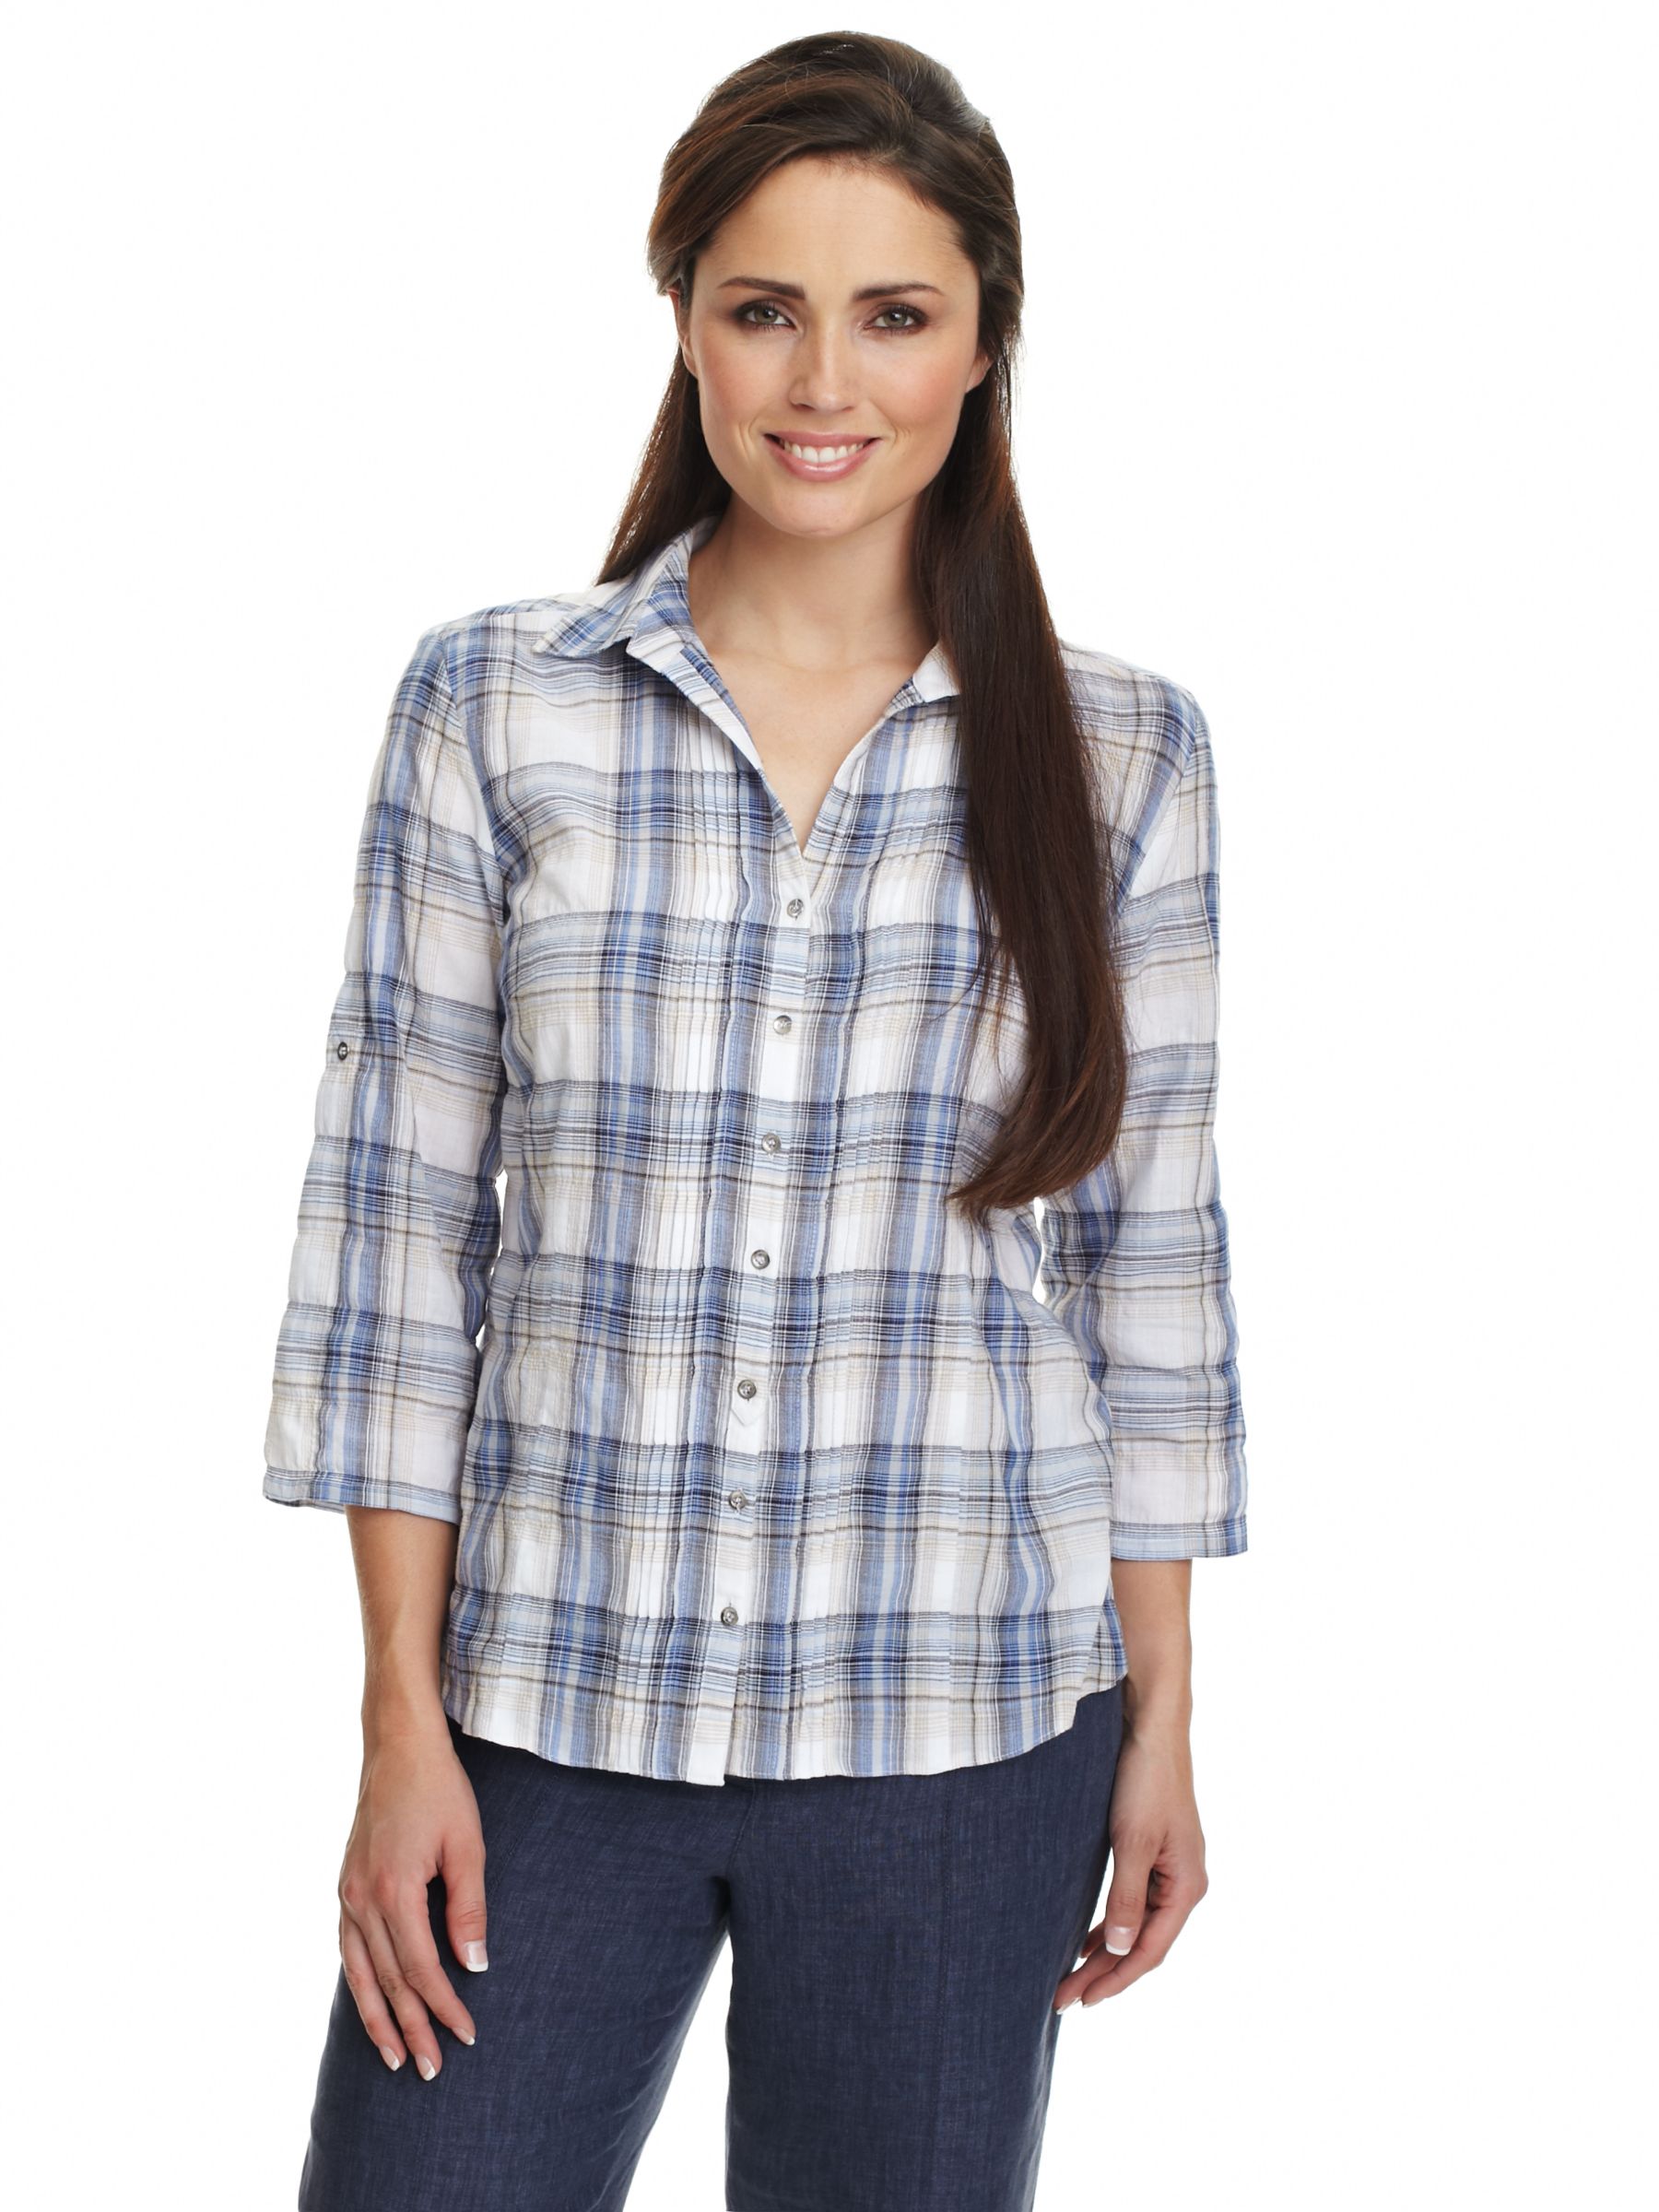 Gerry Weber Cheese Cloth Check Blouse, Blue